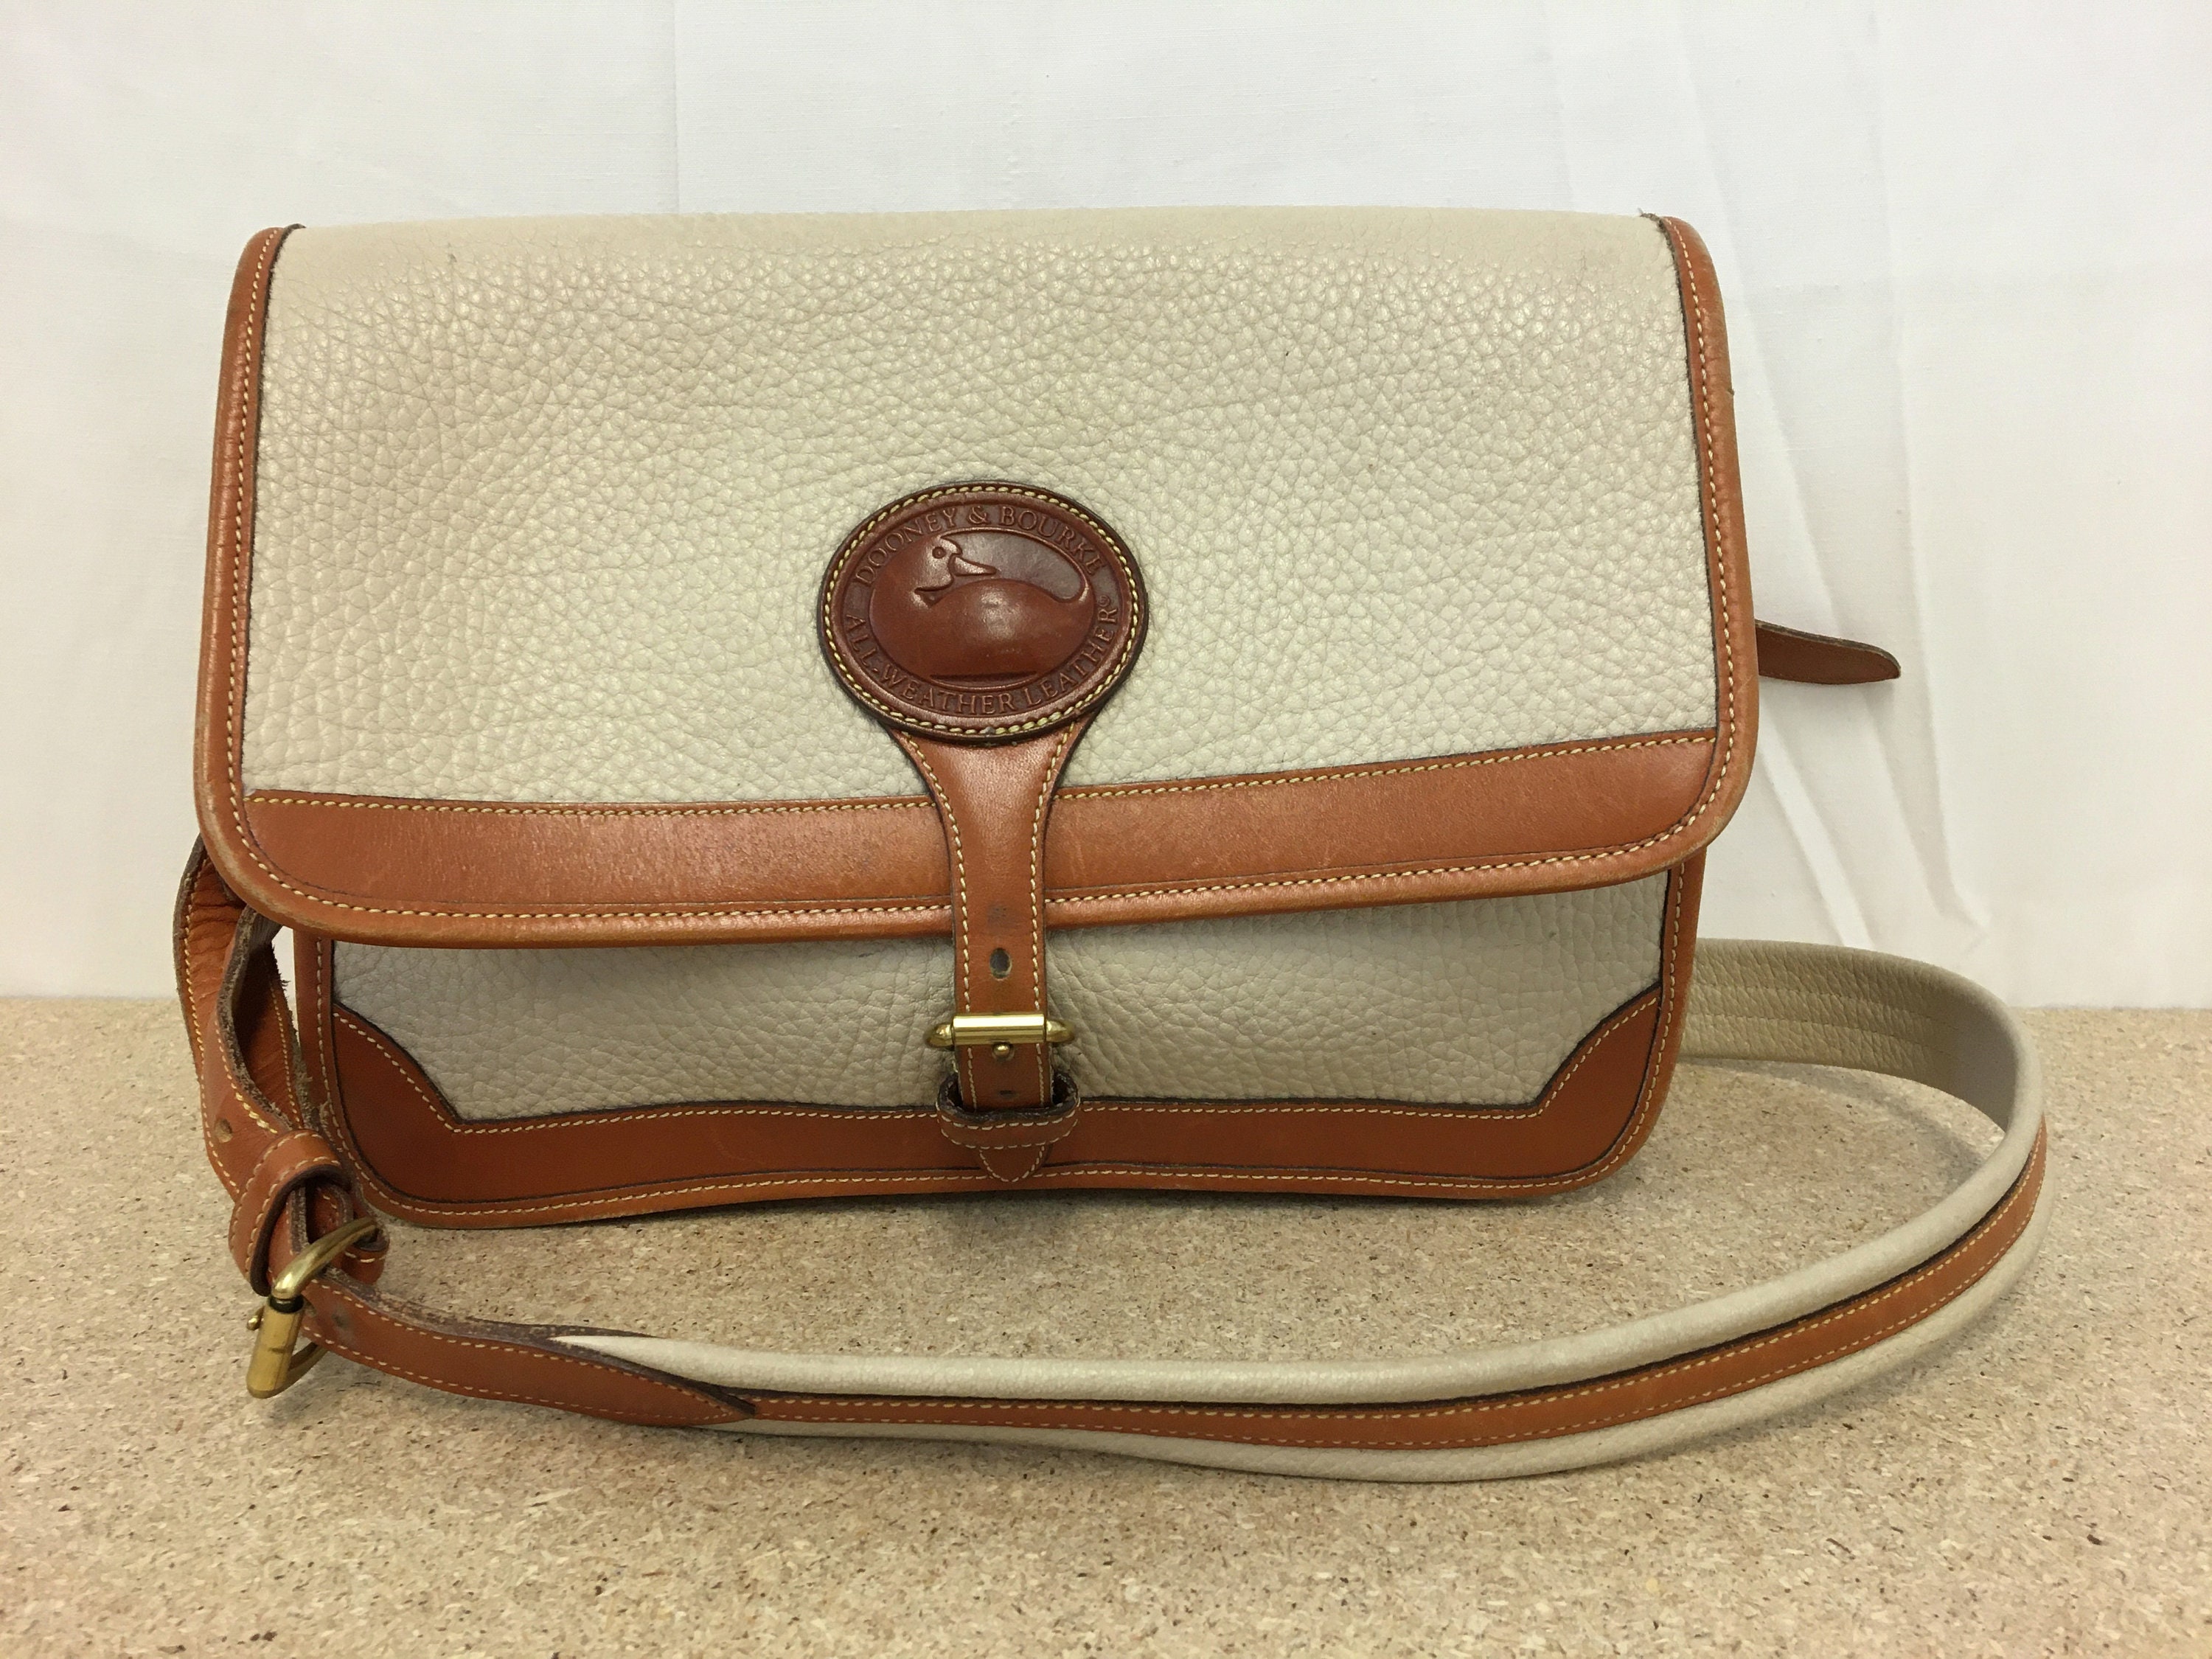 Dooney and Bourke Replacement Adjustable Shoulder/crossbody Strap 1 Wide  34-55 Length Genuine Leathers in Black Brown Tan & More 